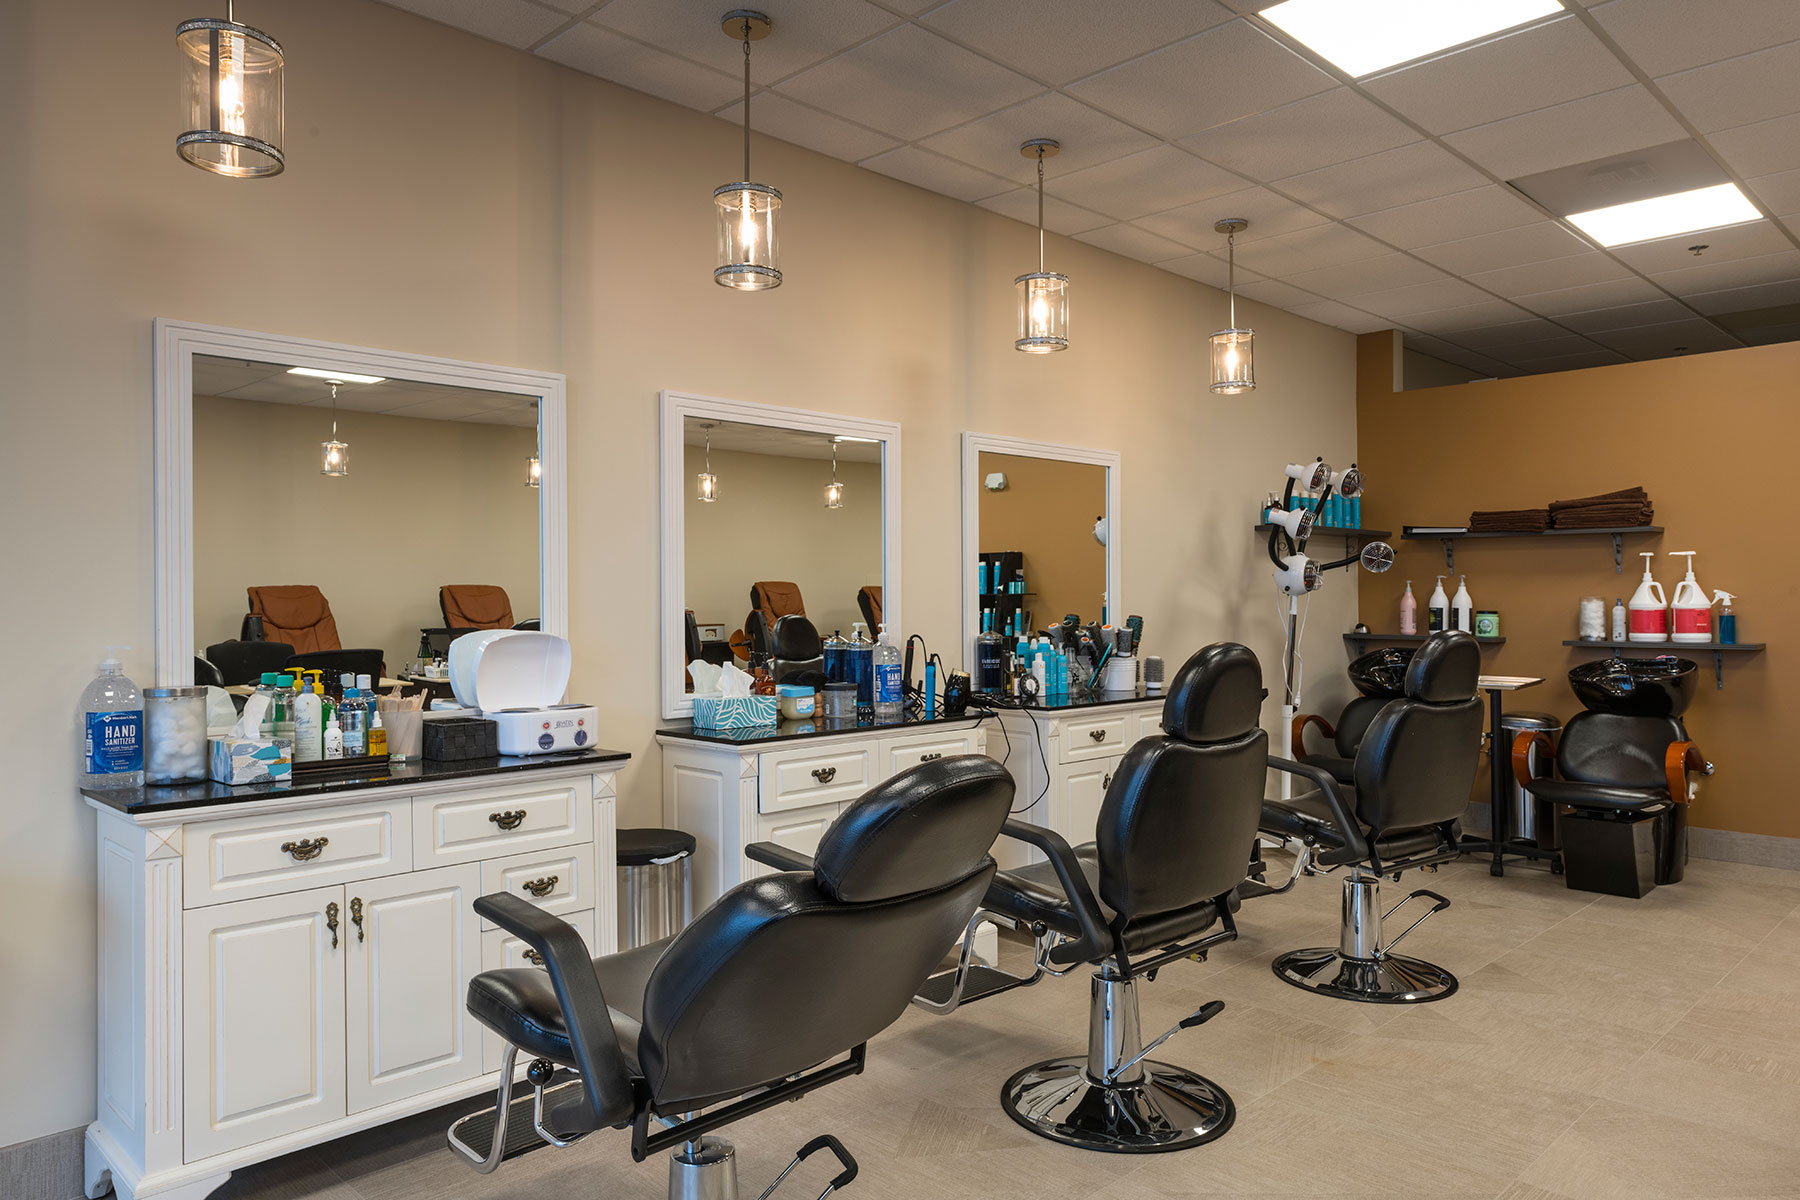 Haircut Stations1 - Hollywood Trendz Hair & Spa Salon, Addison Custom Home. America's Custom Home Builders: New Construction, Remodeling, Restoration Services. Residential and Commercial.